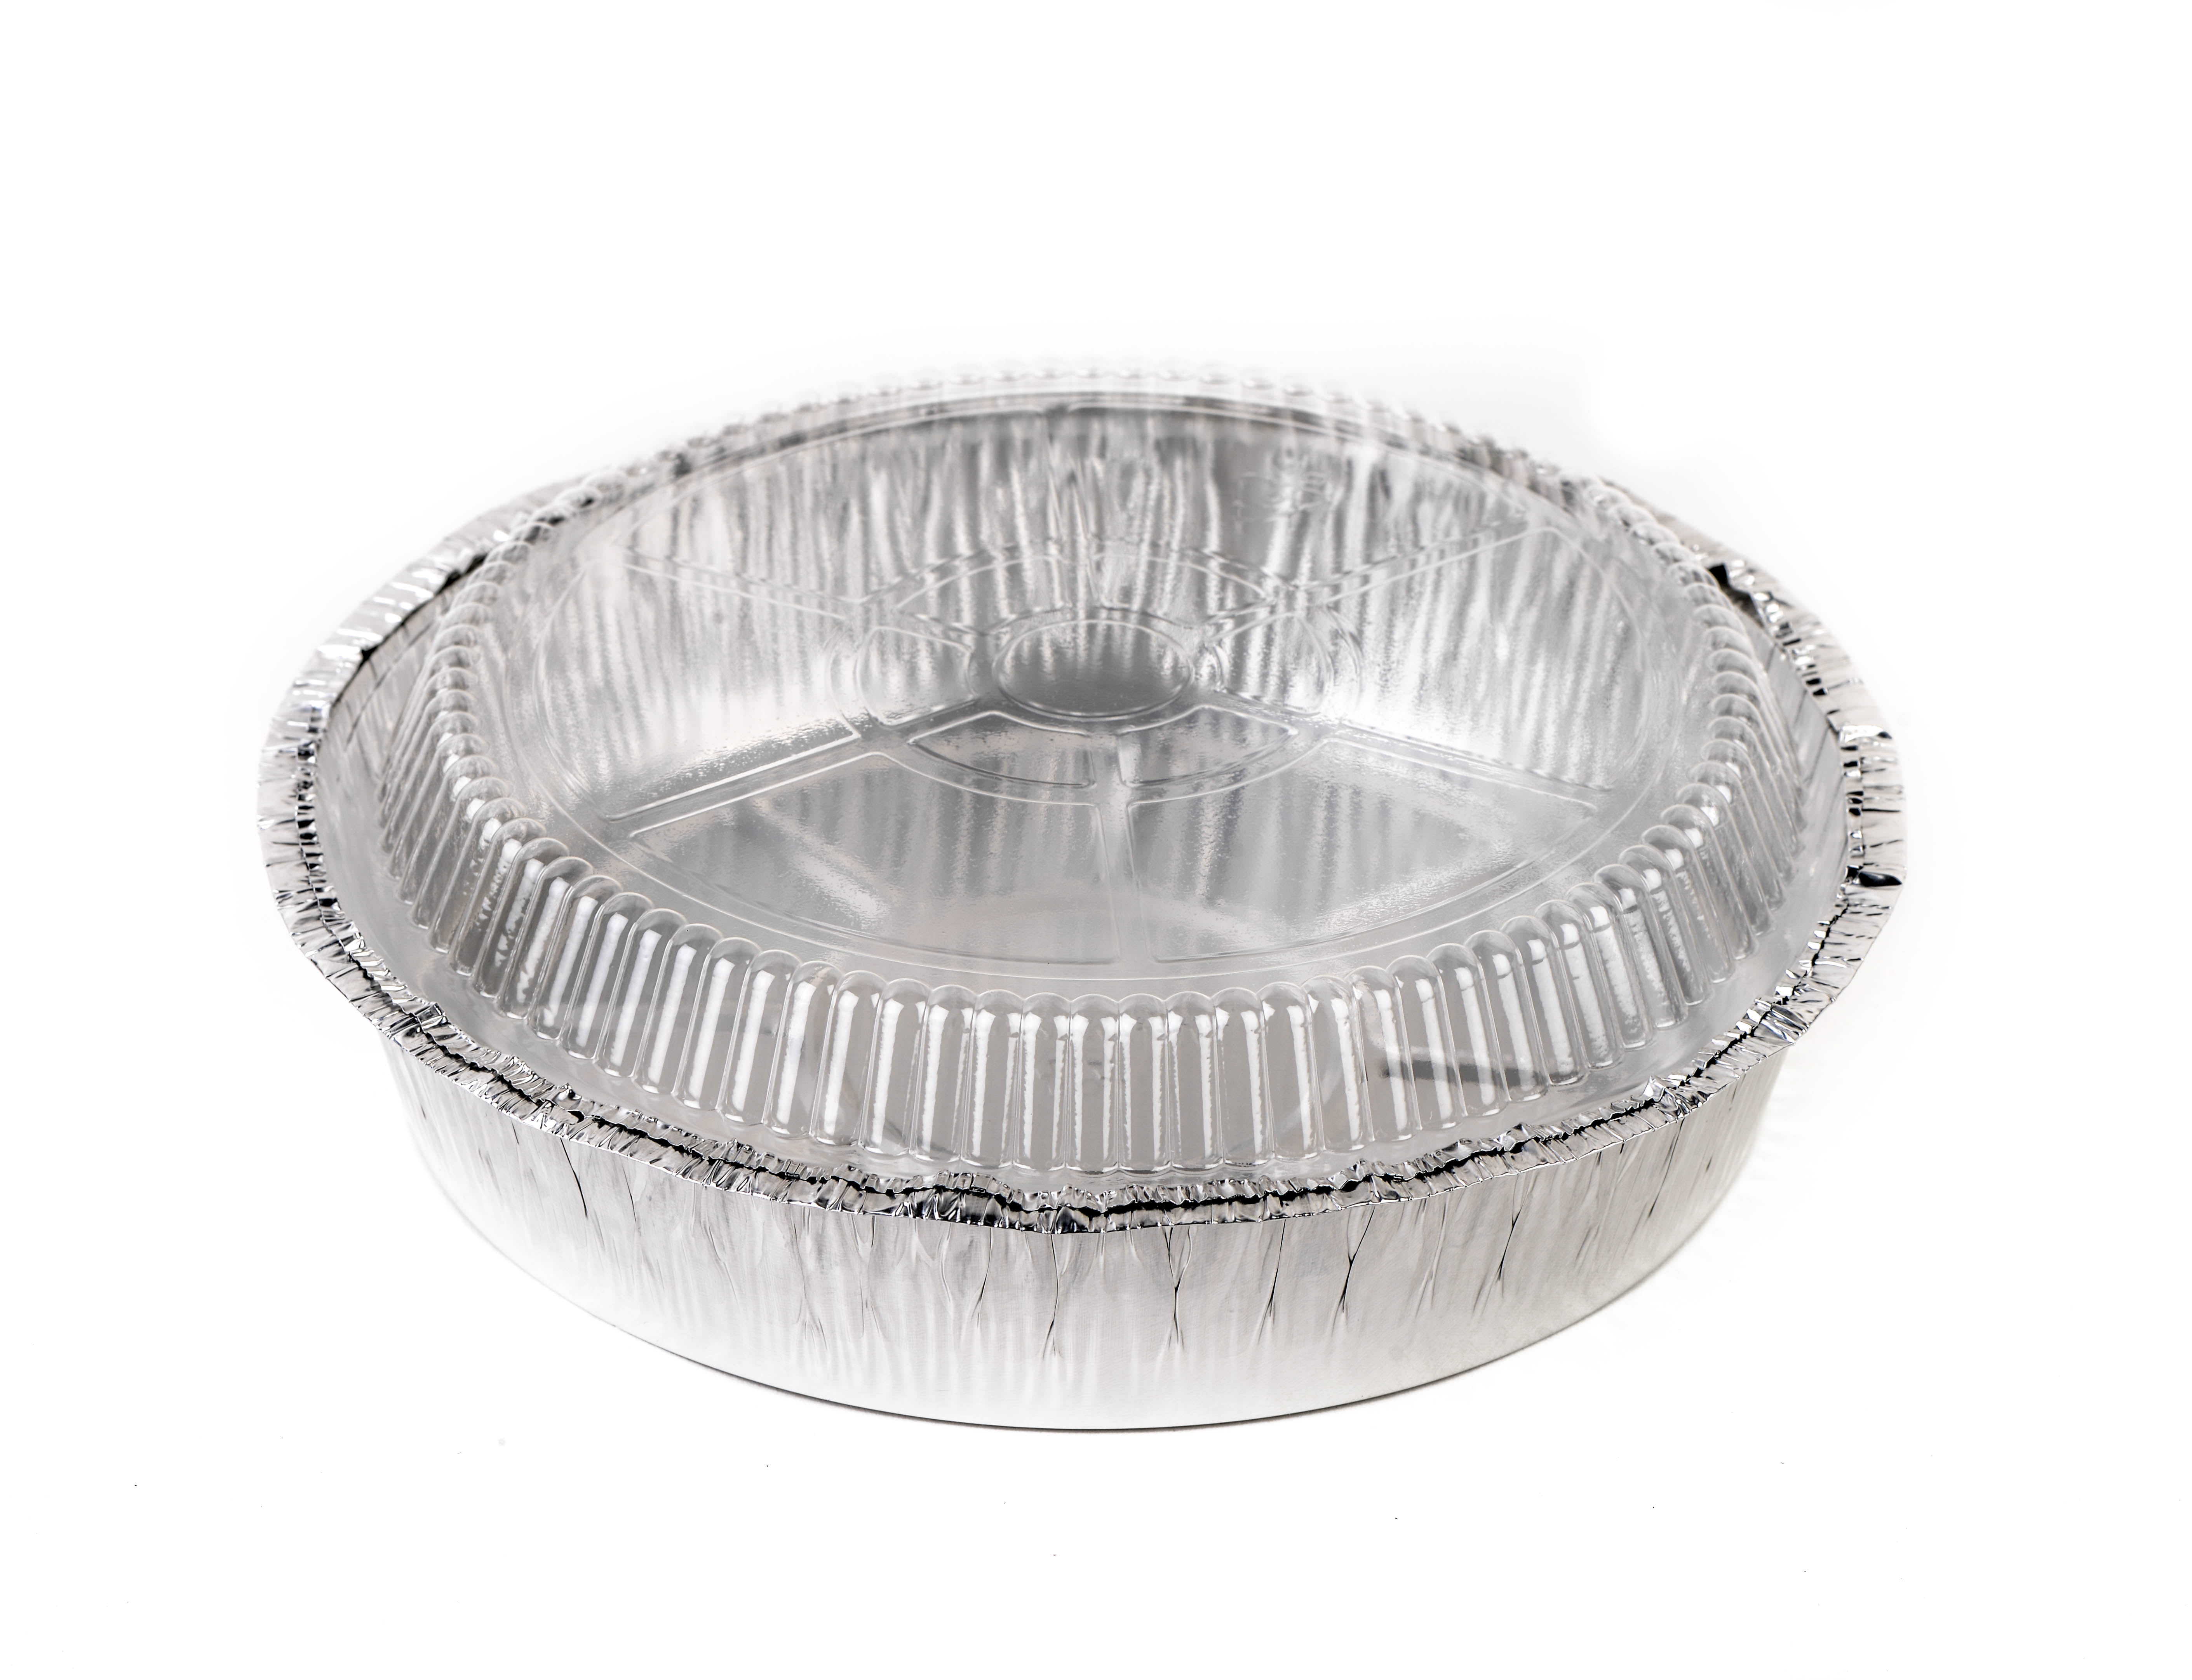 Disposable 8" Round Aluminum Foil Take-Out/Cake Pan w/Clear Dome Lid 50 PK